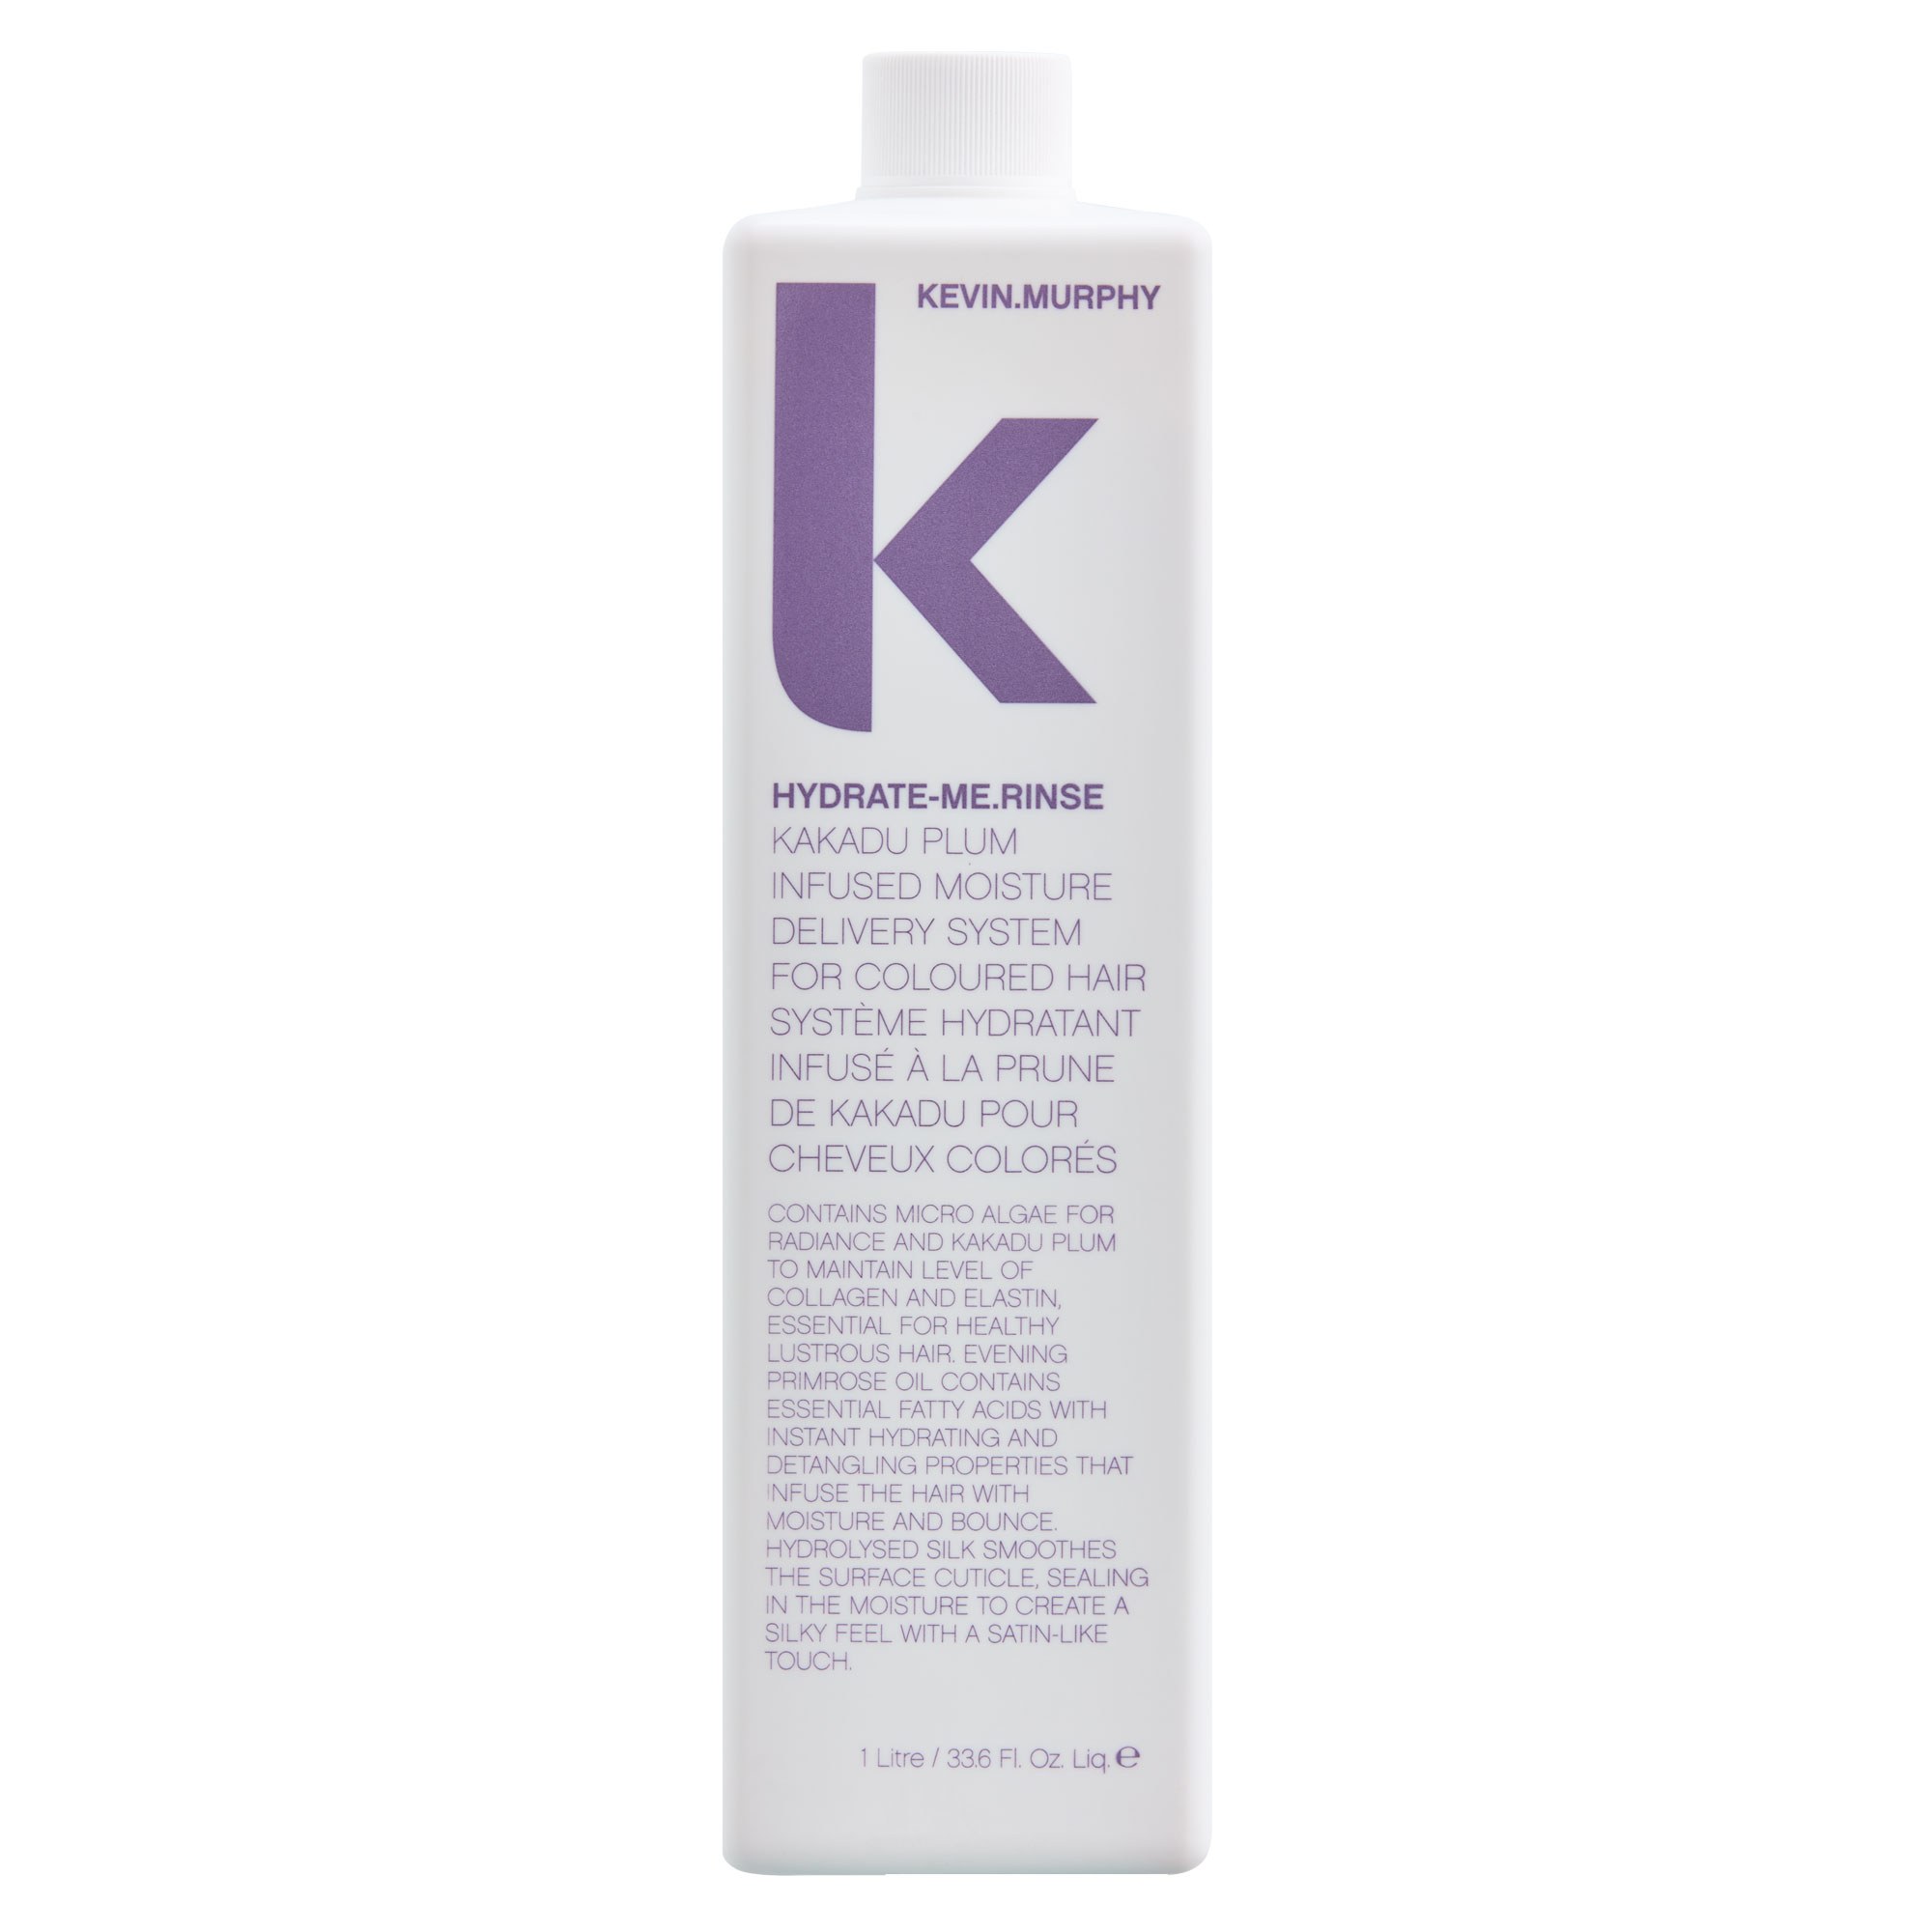 KEVIN.MURPHY HYDRATE.ME RINSE 1liter